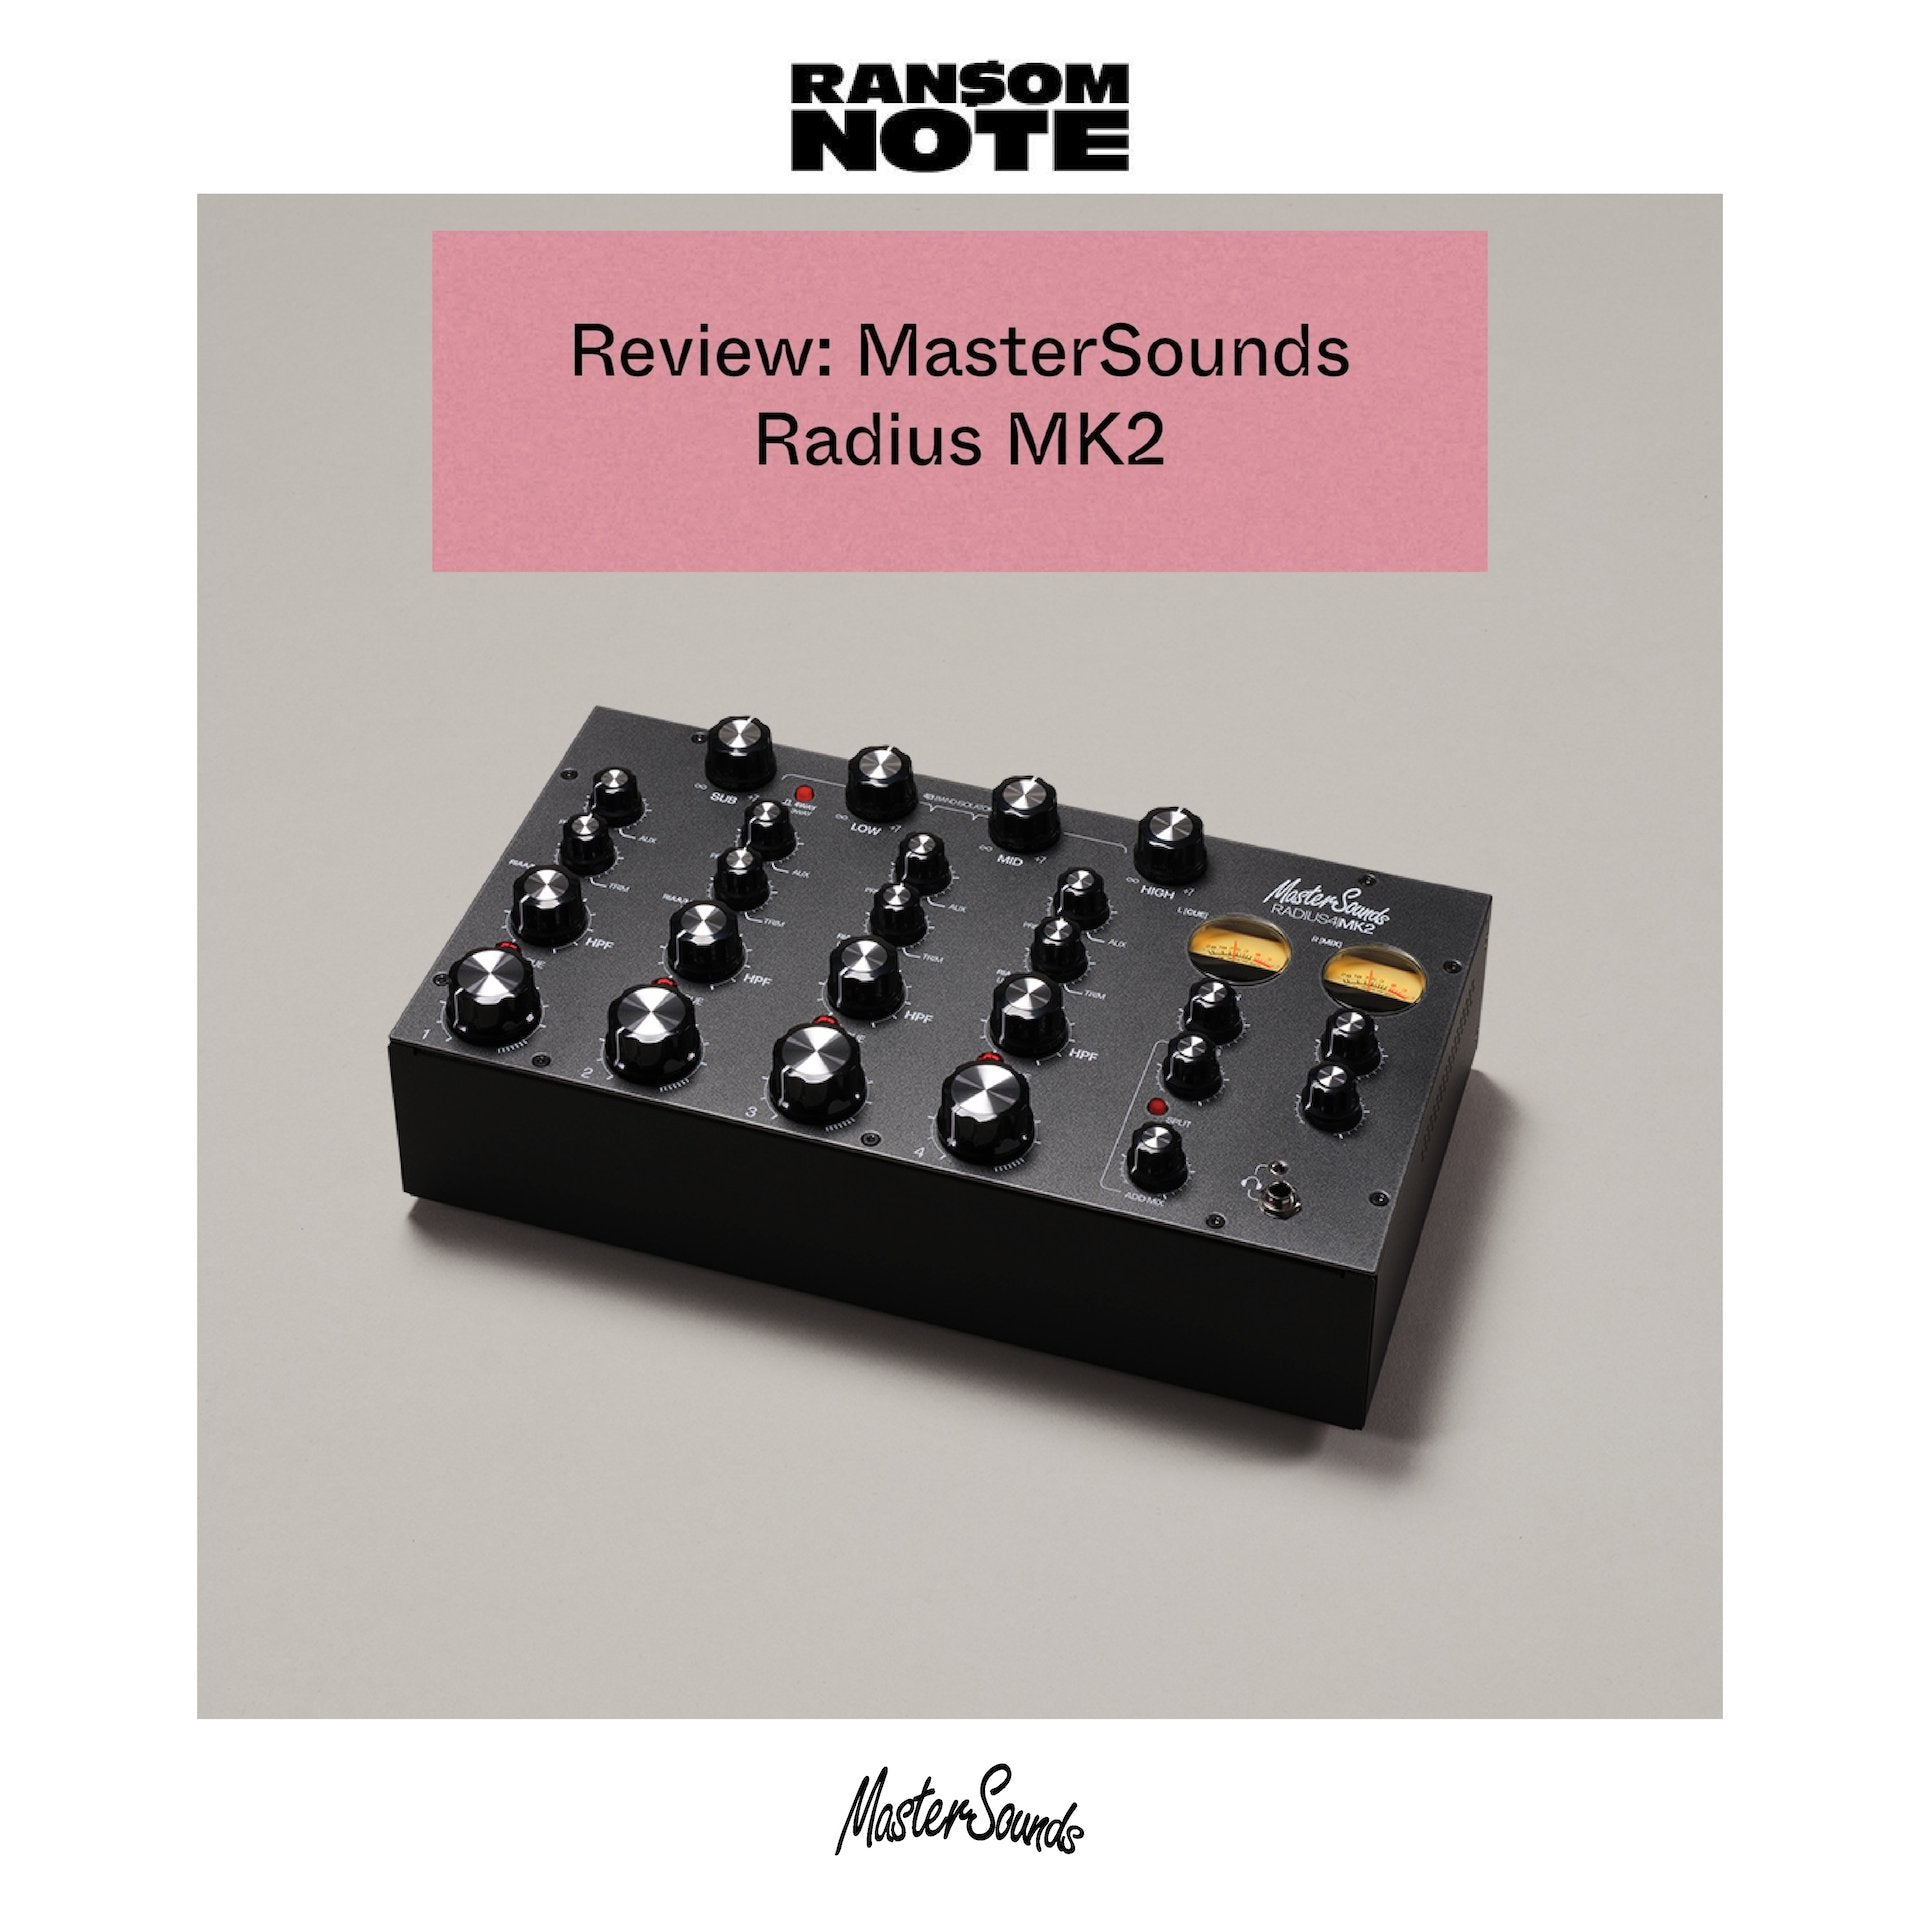 "The Ideal Mixer For Both At Home And In The Dance": Ransom Note Recommends Radius MK2 - MasterSounds